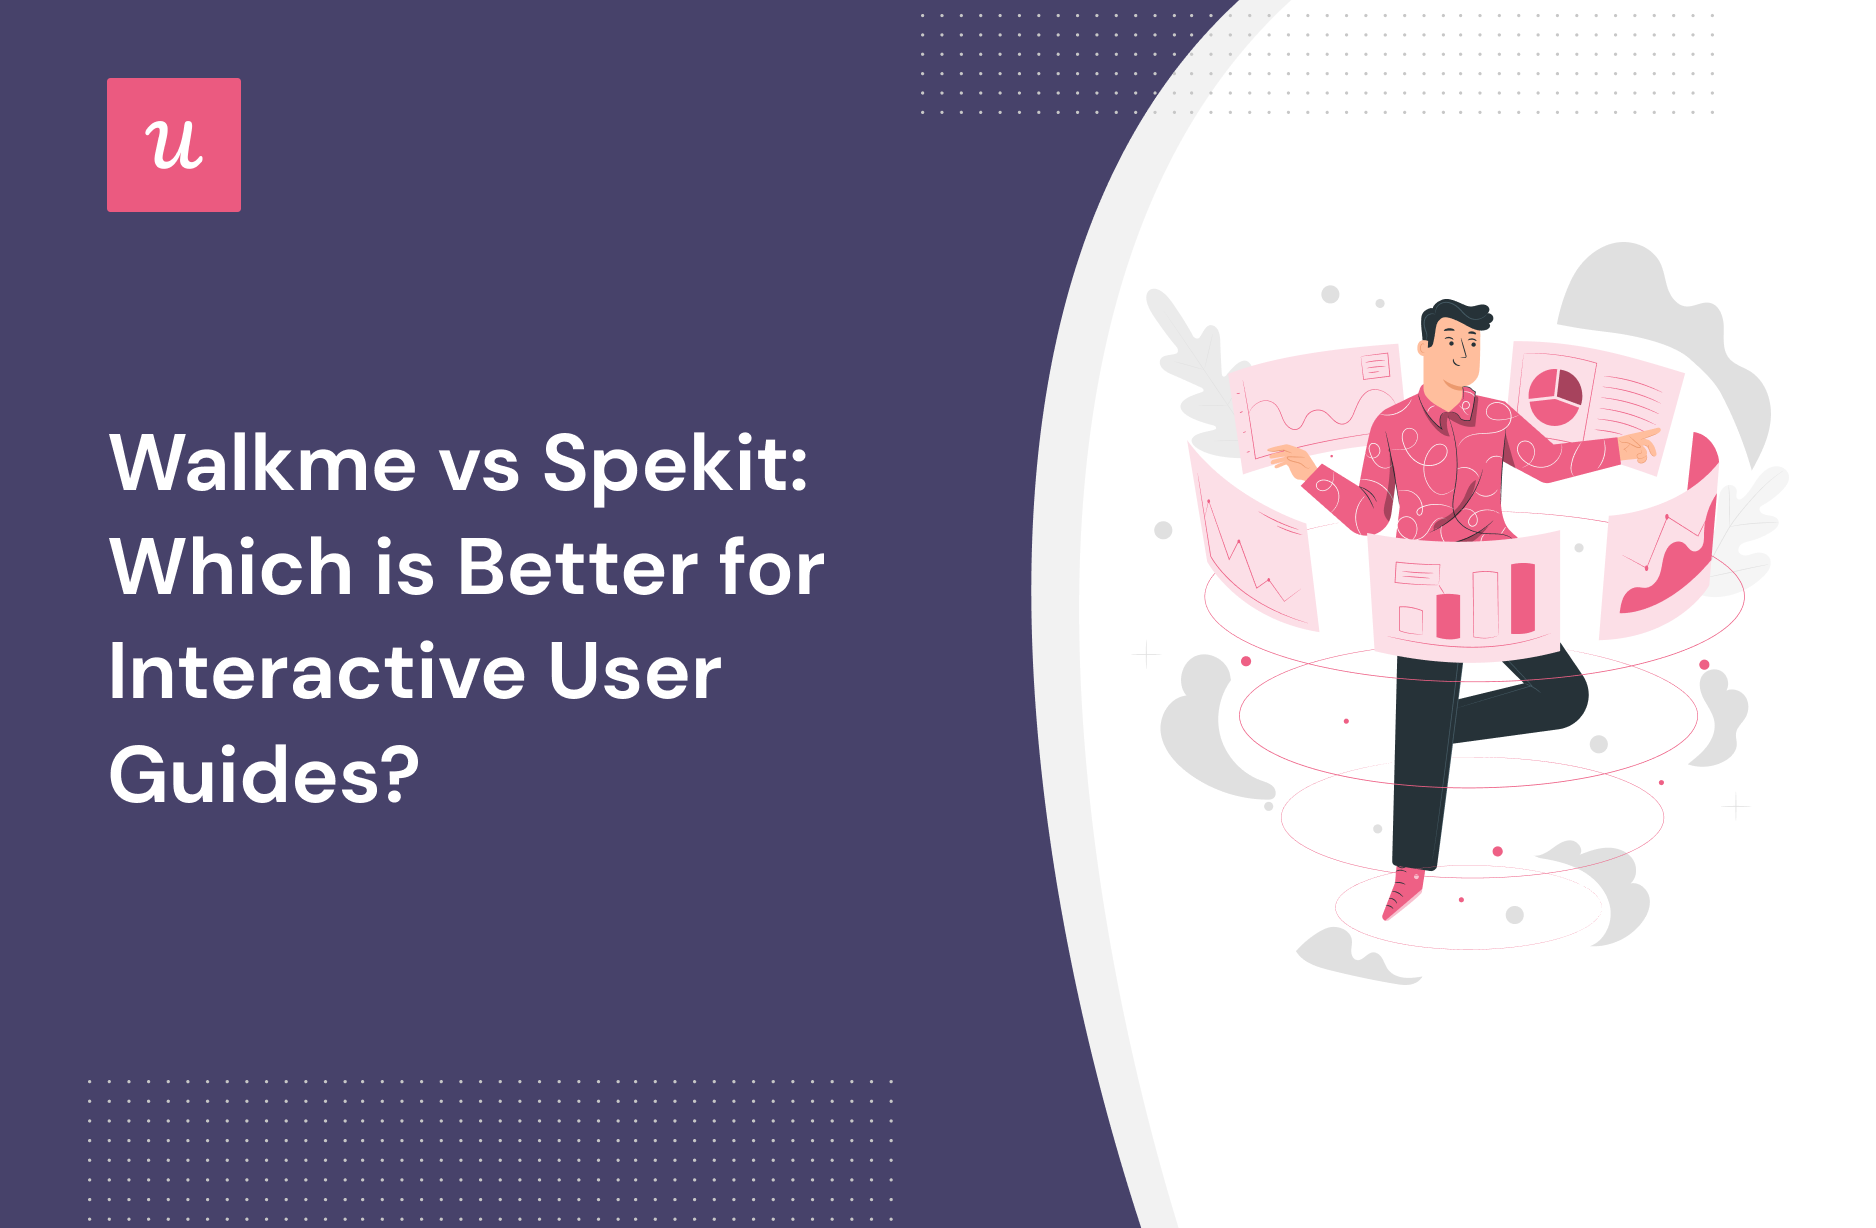 Walkme vs Spekit: Which is Better for Interactive User Guides?